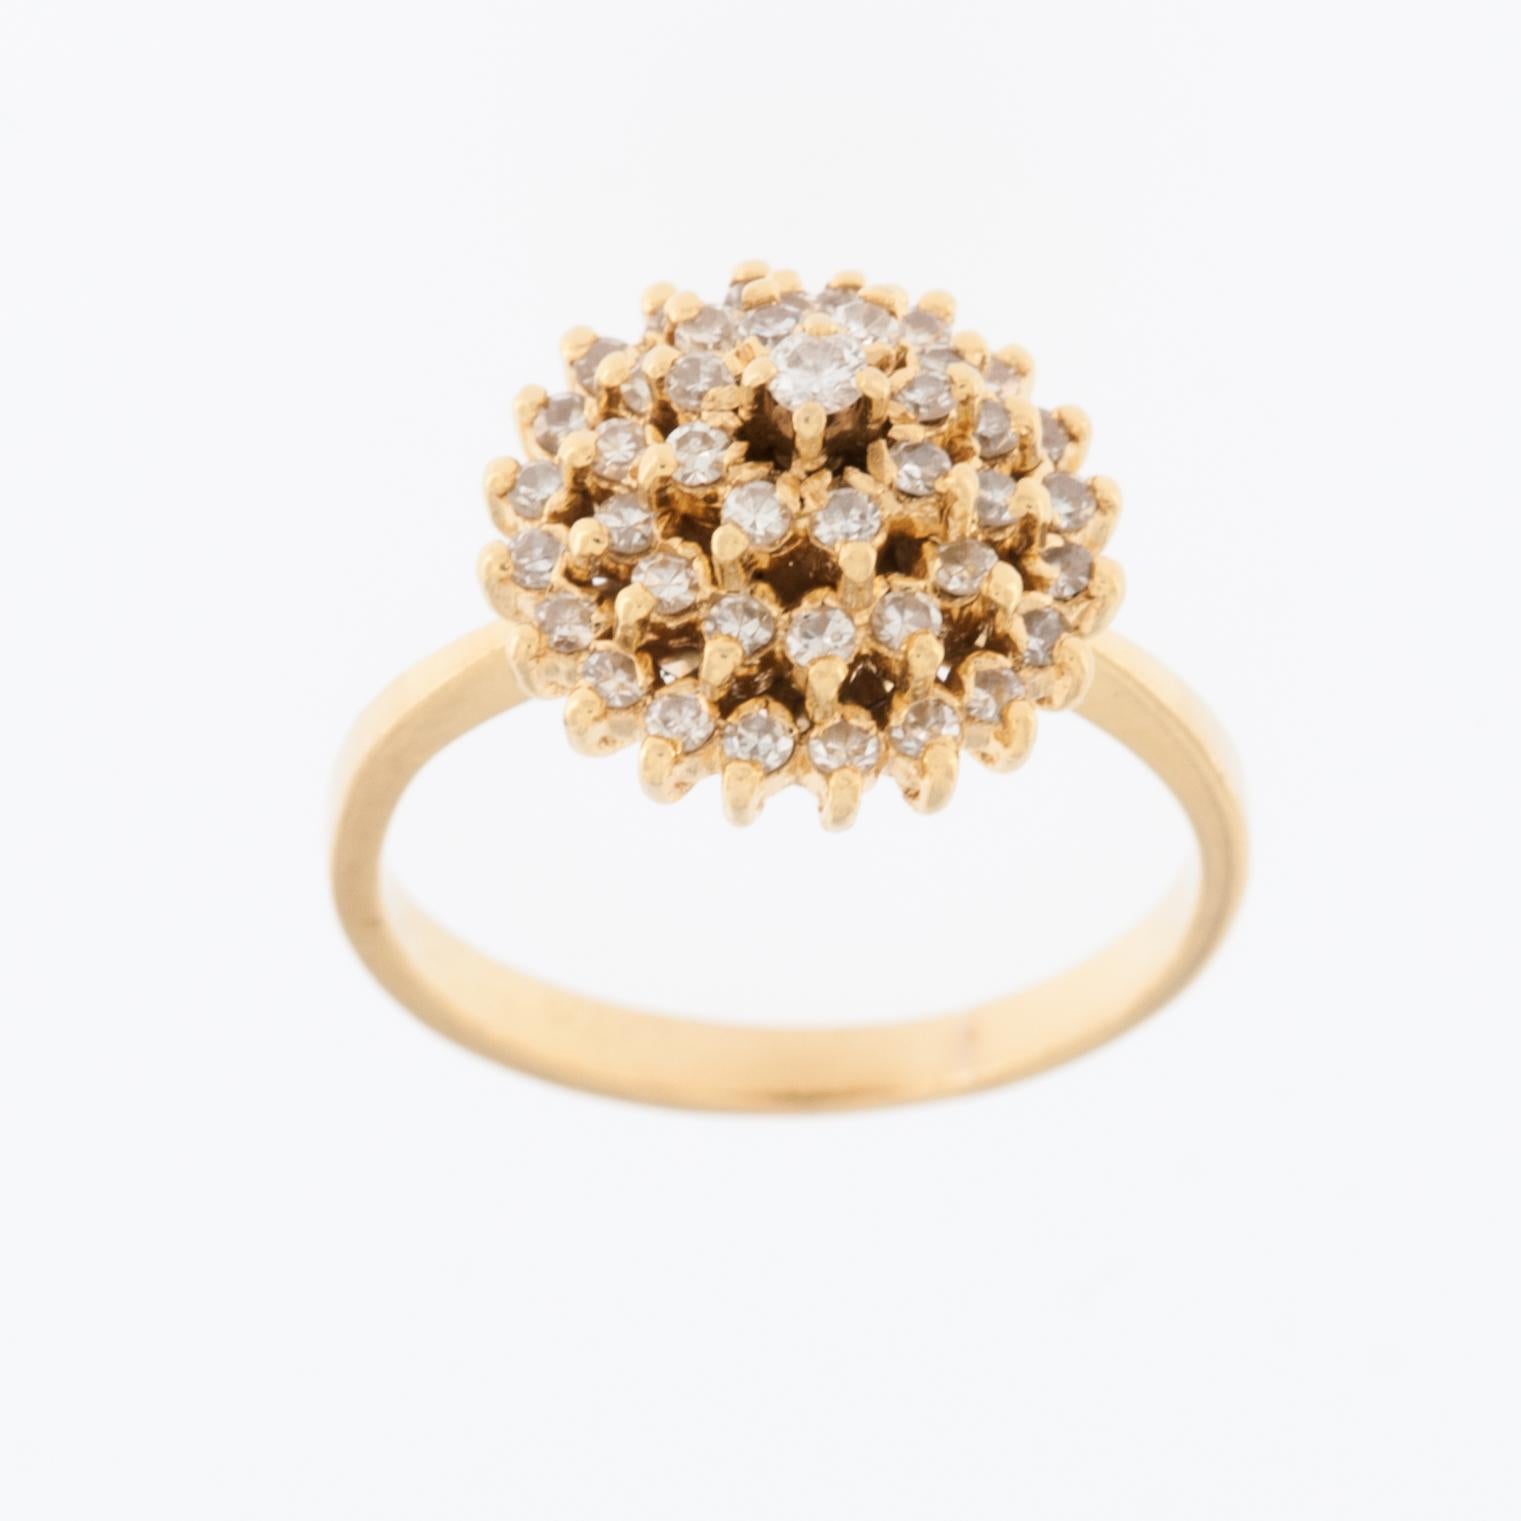 This Portuguese 19kt Yellow Gold Ring with Diamonds is a luxurious and elegant piece of jewelry. It is crafted from 19 karat (19kt) yellow gold, which is known for its rich, warm color and durability. The ring features an exquisite design with the